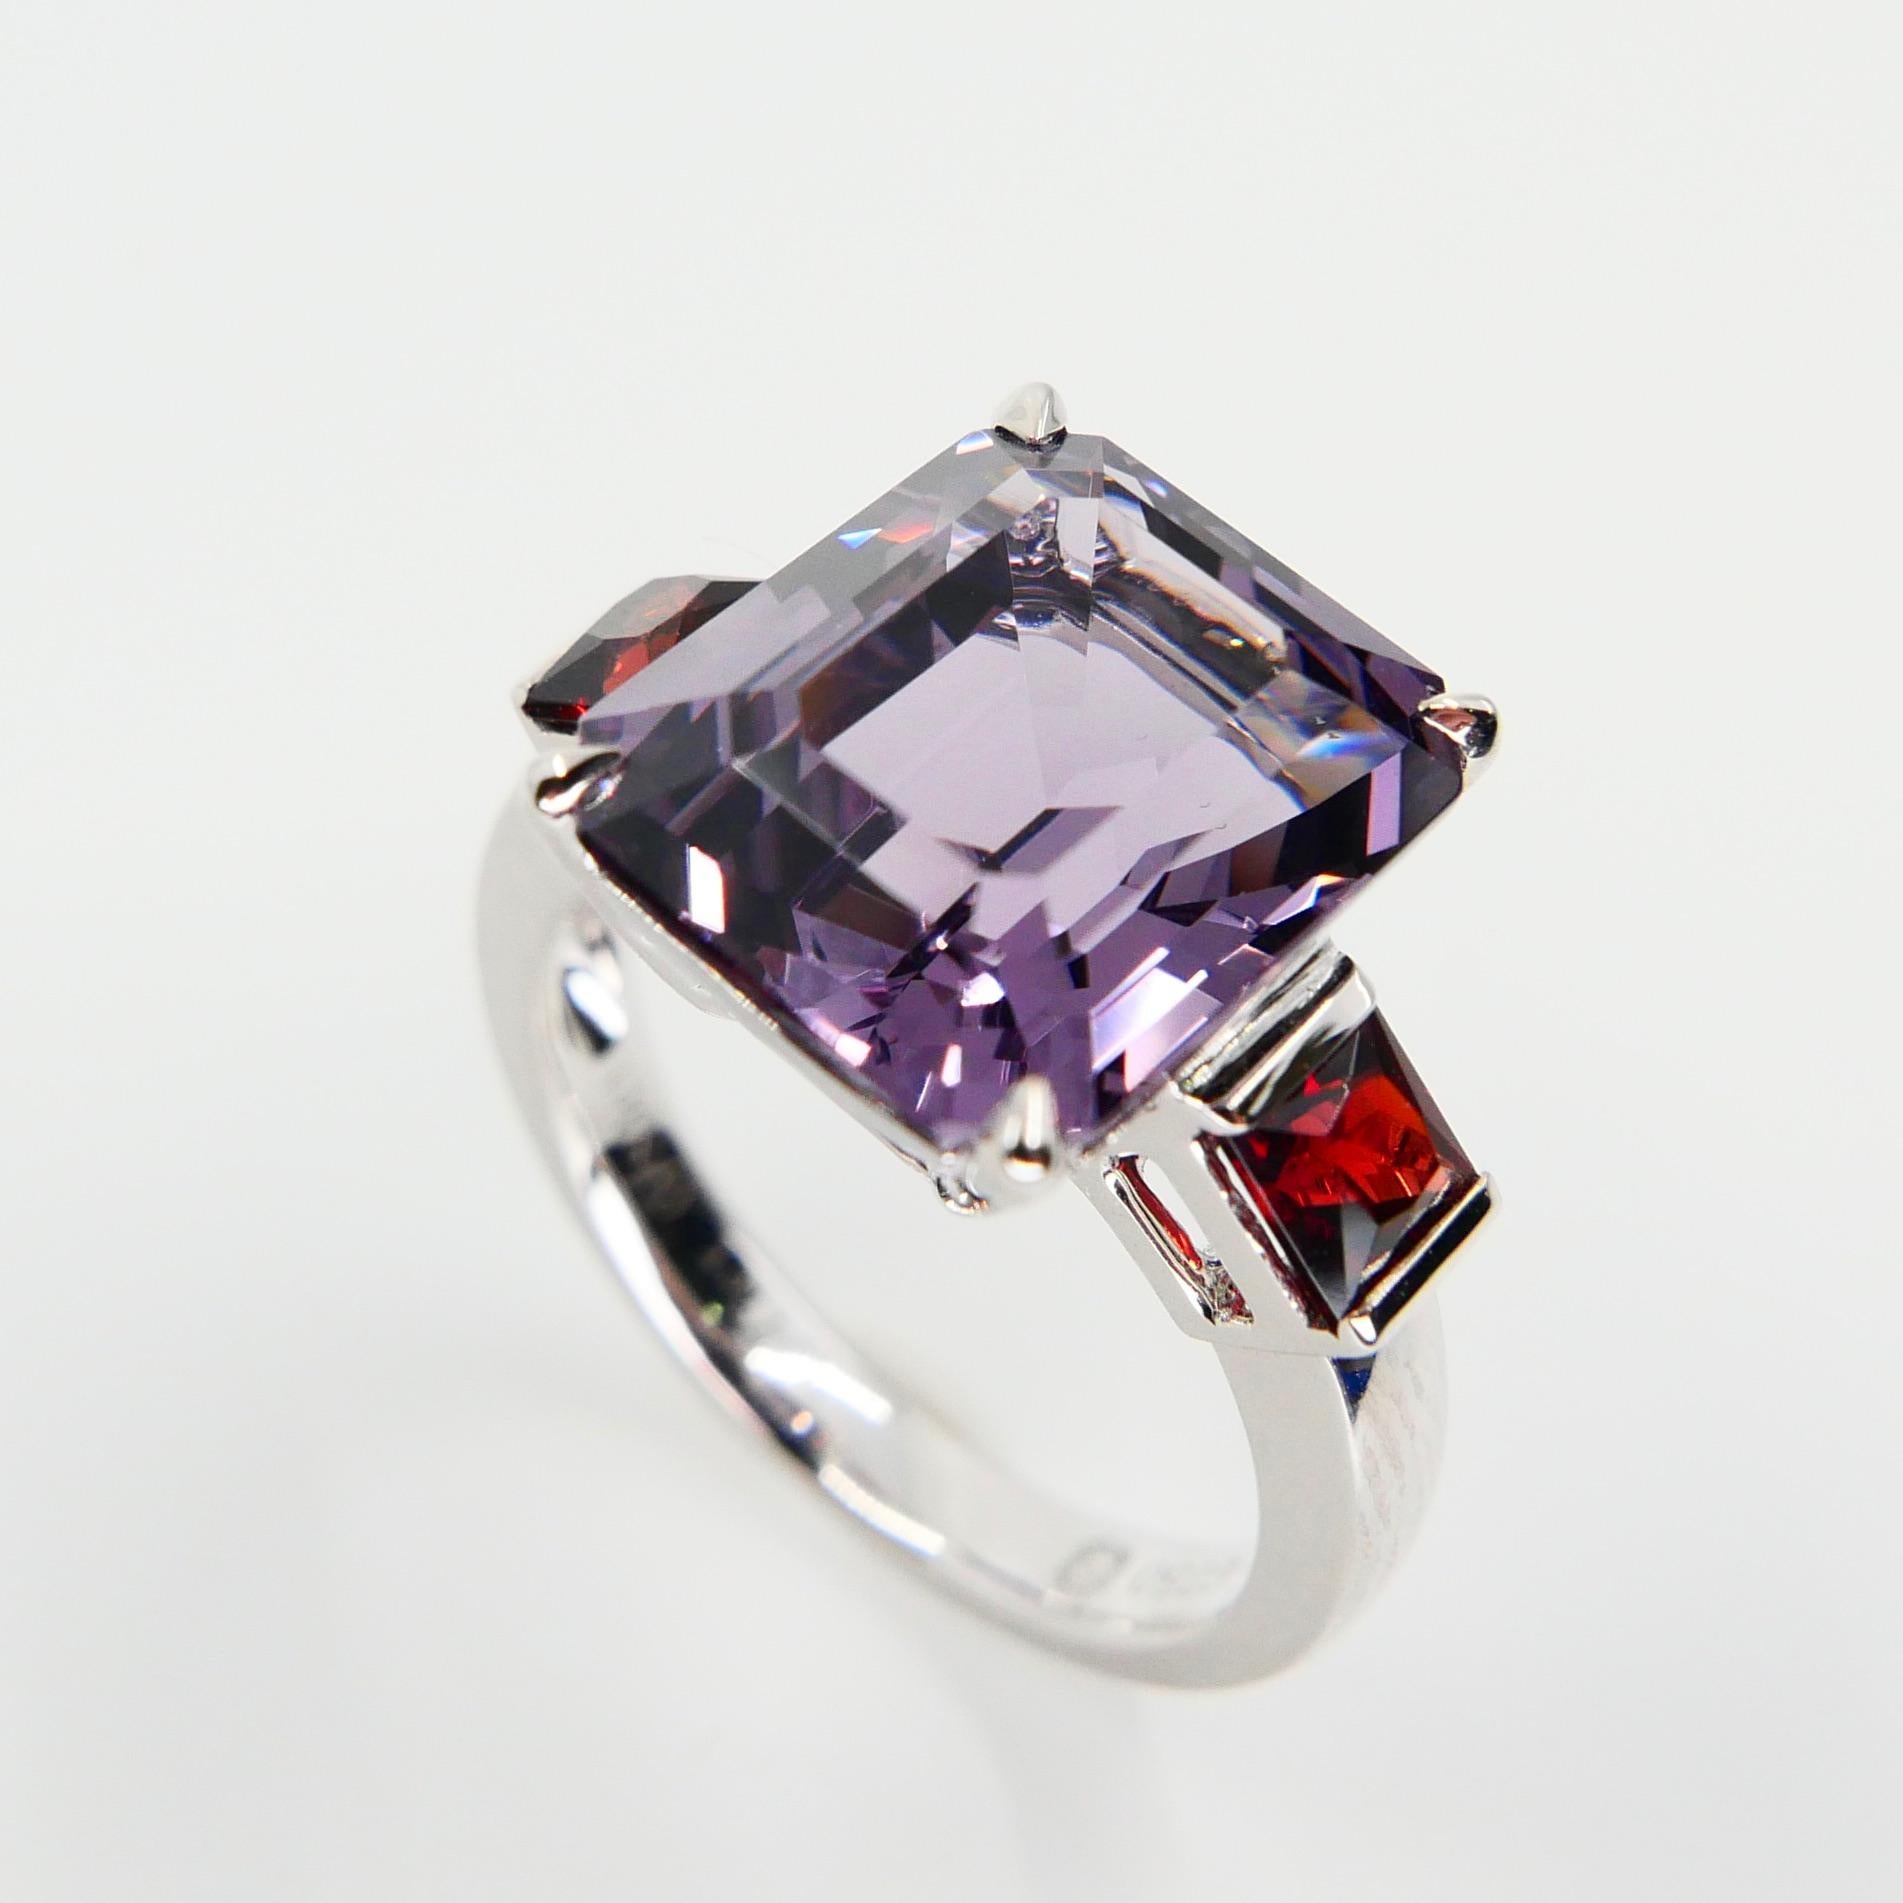 Natural 7.77 Cts Purple Spinel & 0.83 Carat Red Spinel Three-Stone Cocktail Ring 9